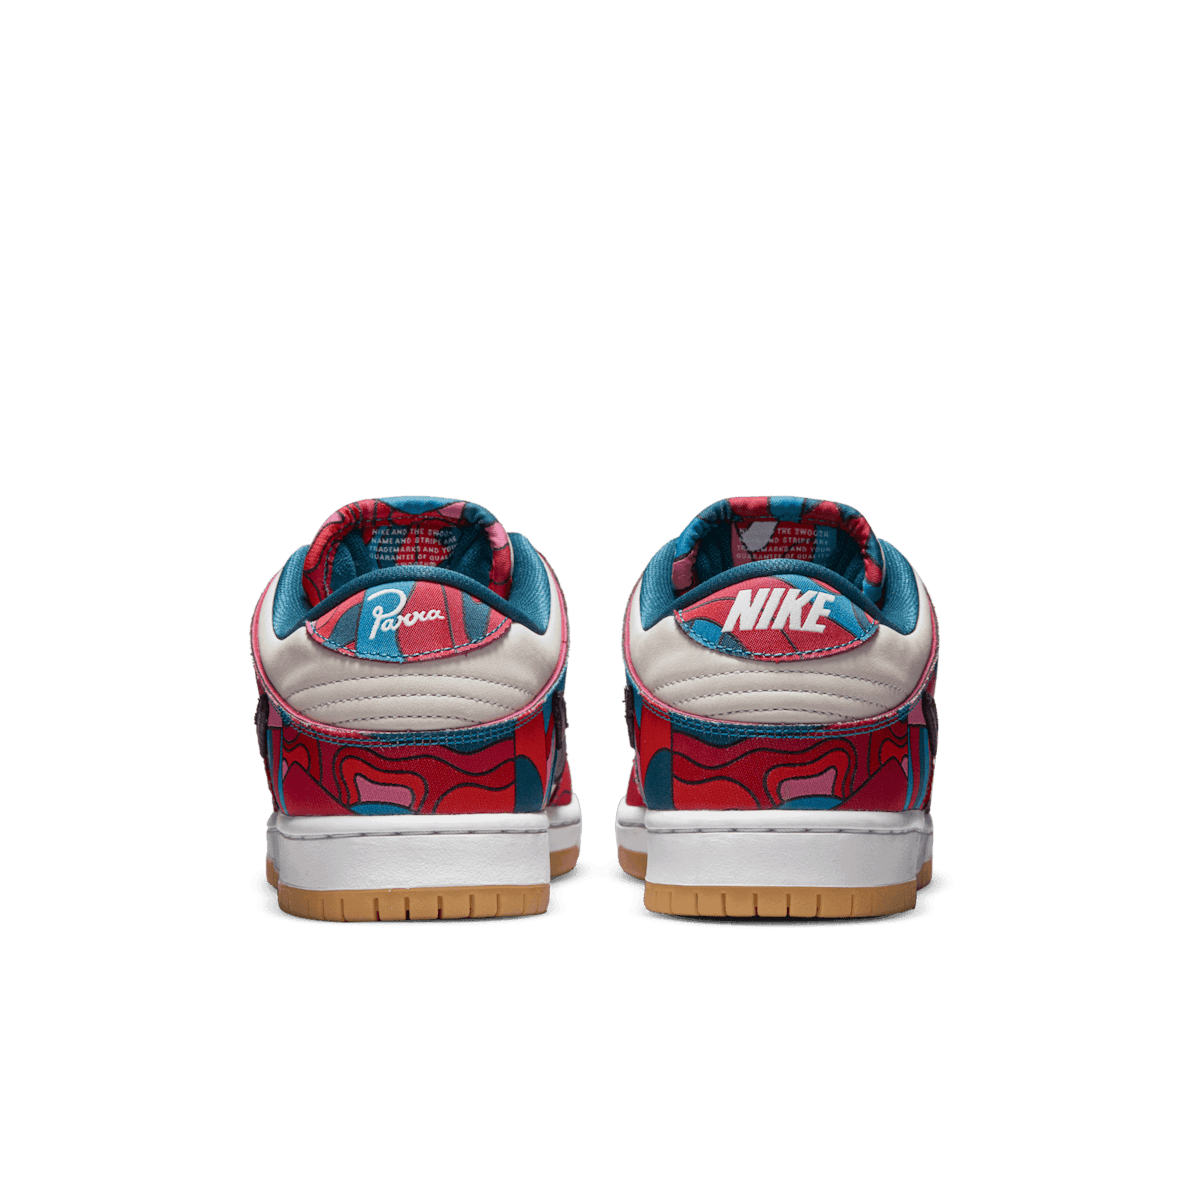 Nike SB Parra Dunk Low Pro Abstract Art Angle 3